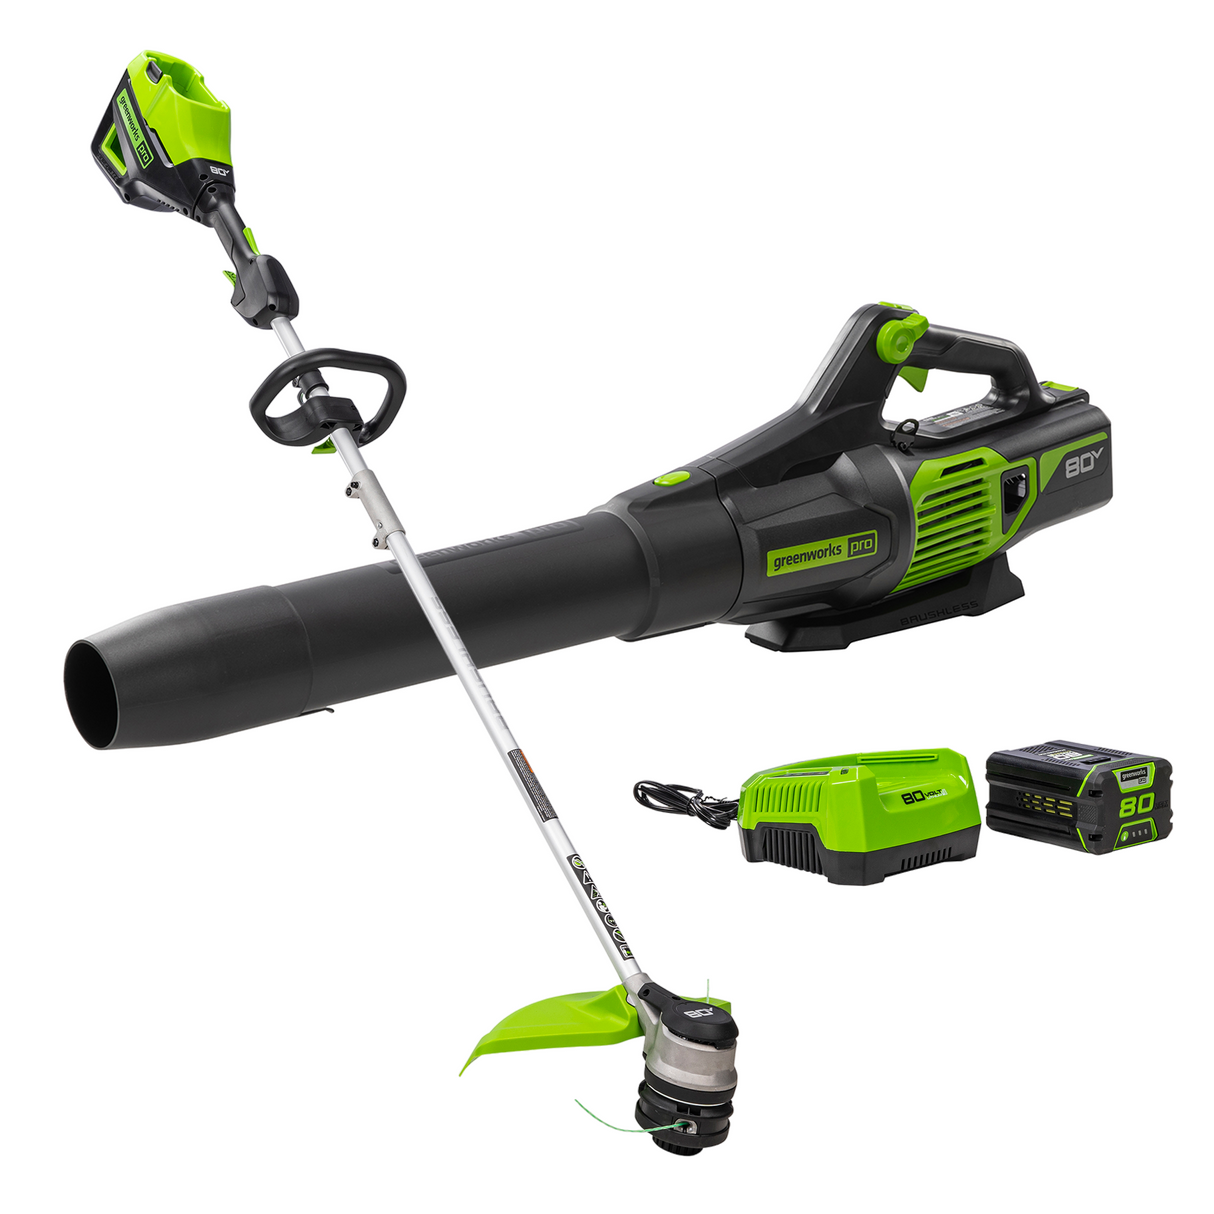 80V 16" String Trimmer & 80V Axial Blower Combo Kit, 2.0Ah Battery and Charger Included